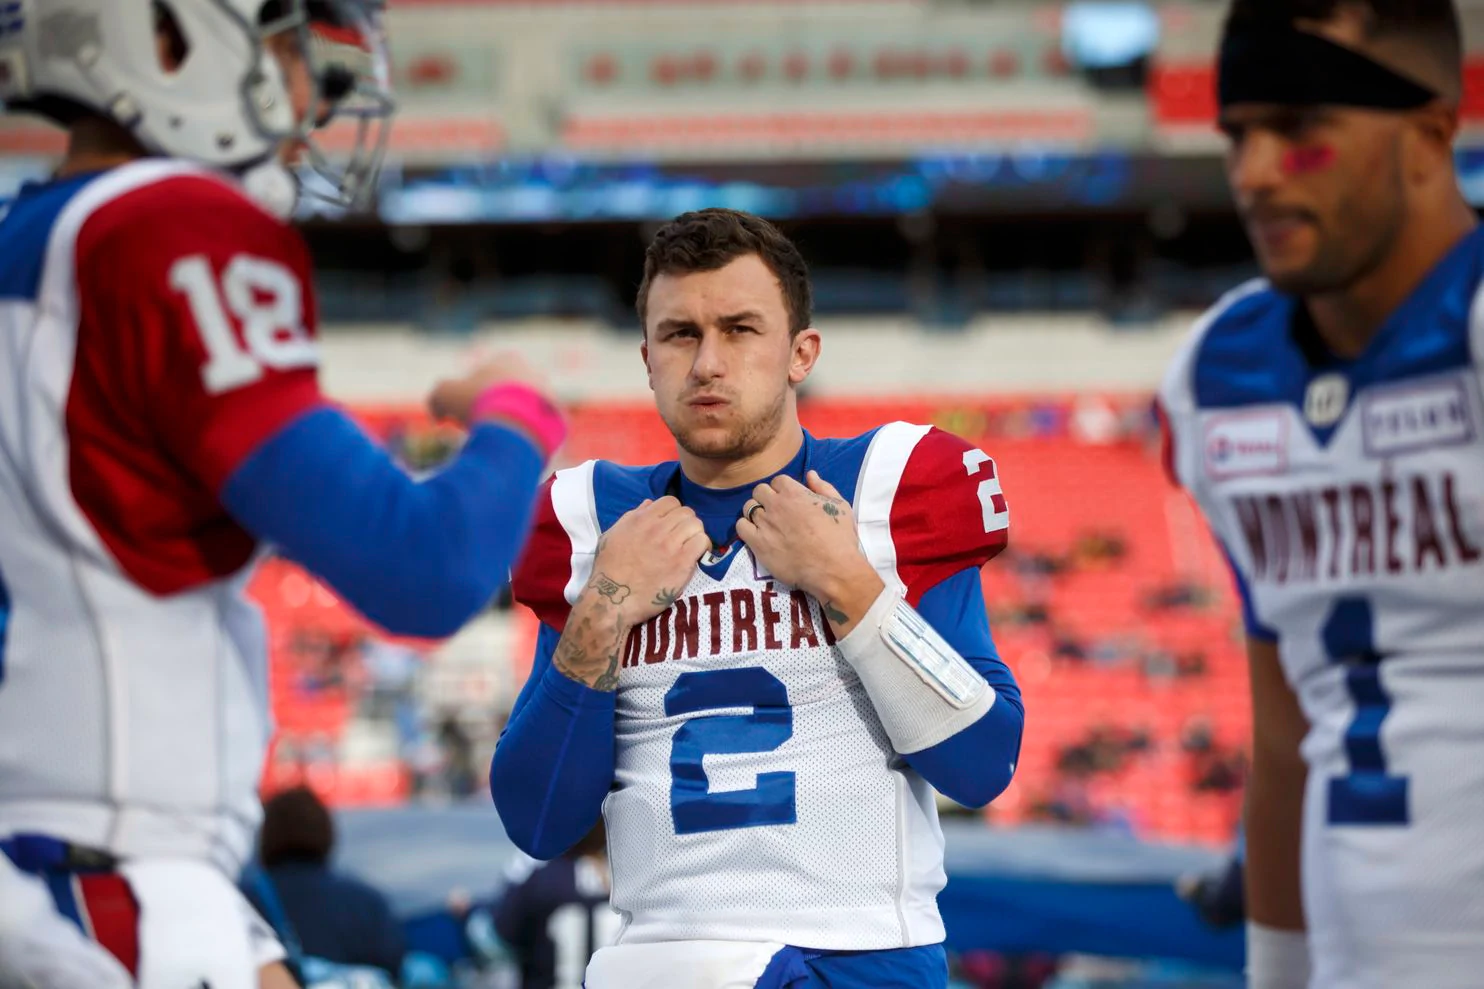 Johnny Manziel Signs With Memphis Express of AAF